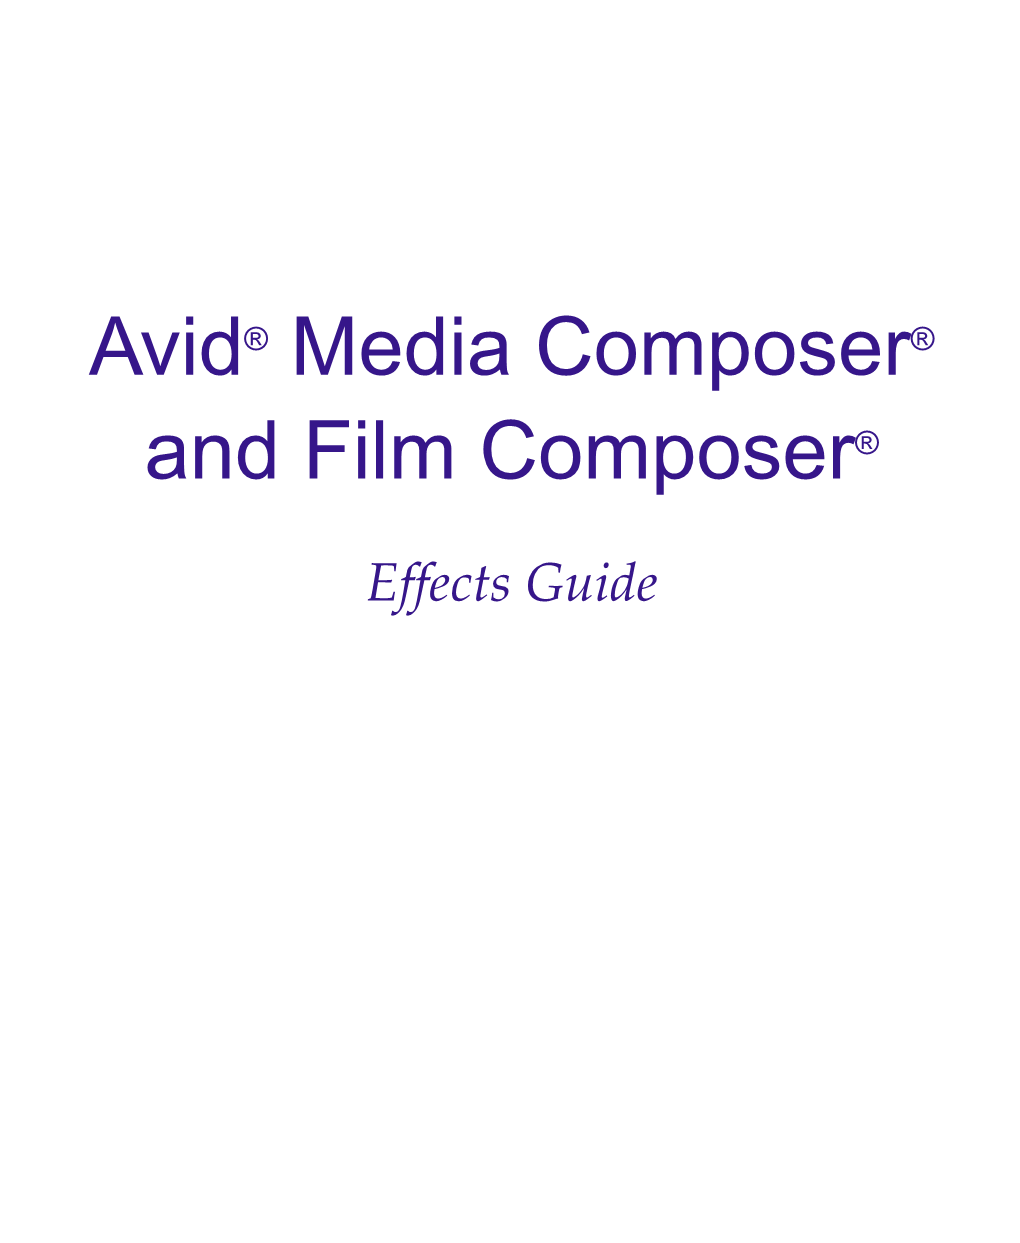 Media Composer and Film Composer Effects Guide